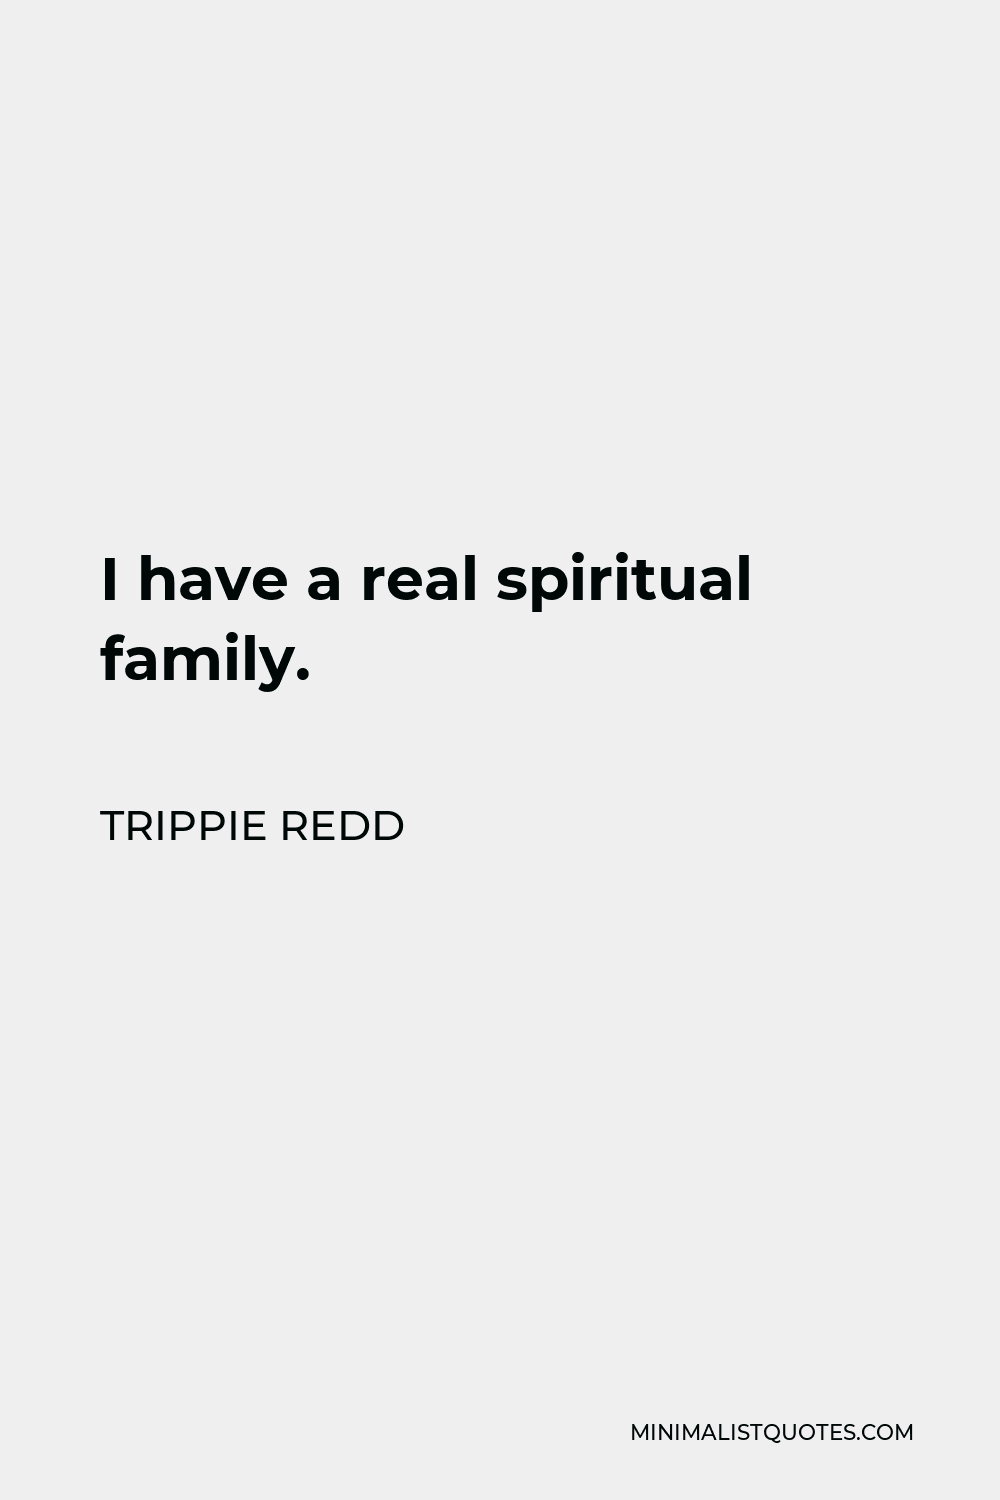 Trippie Redd Quote - I have a real spiritual family.